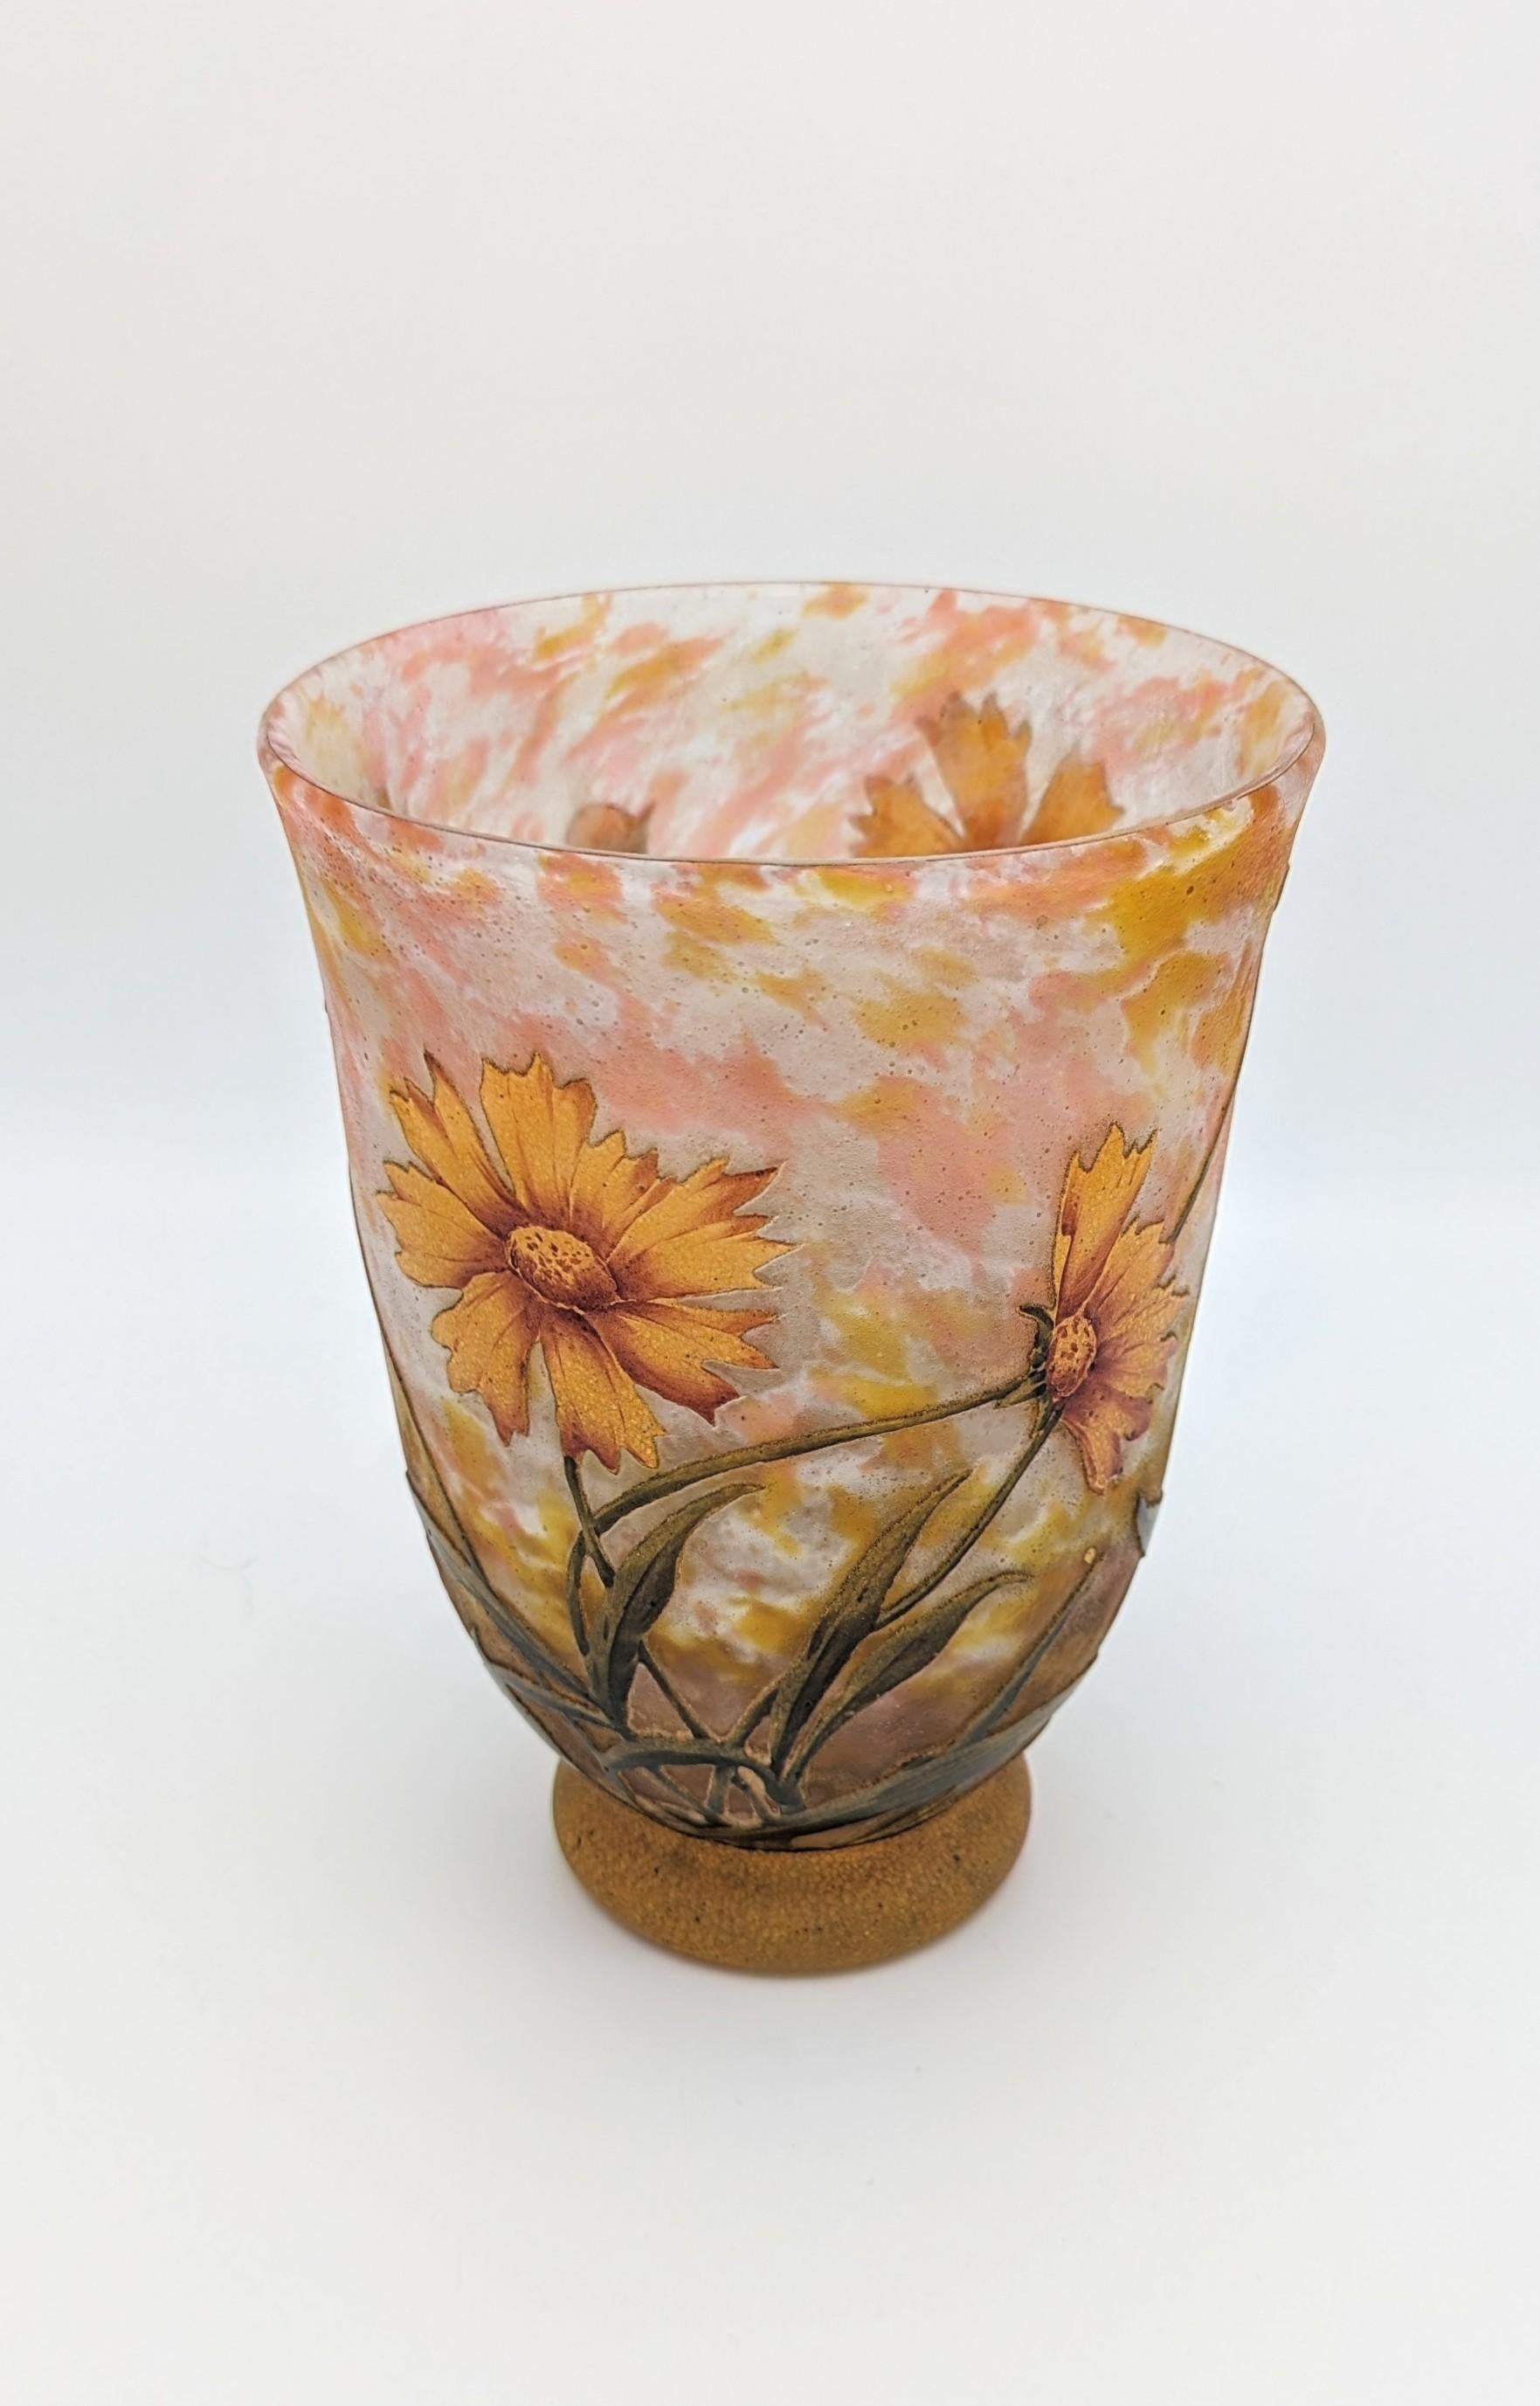 A fine Daum Frères Vase with Coreopsis flowers, made in Nancy, France circa 1914. This example of French cameo glass, was mottled with glass powder, cased with an overlay, then acid etched and enameled. It is a particular bright and crisp example of